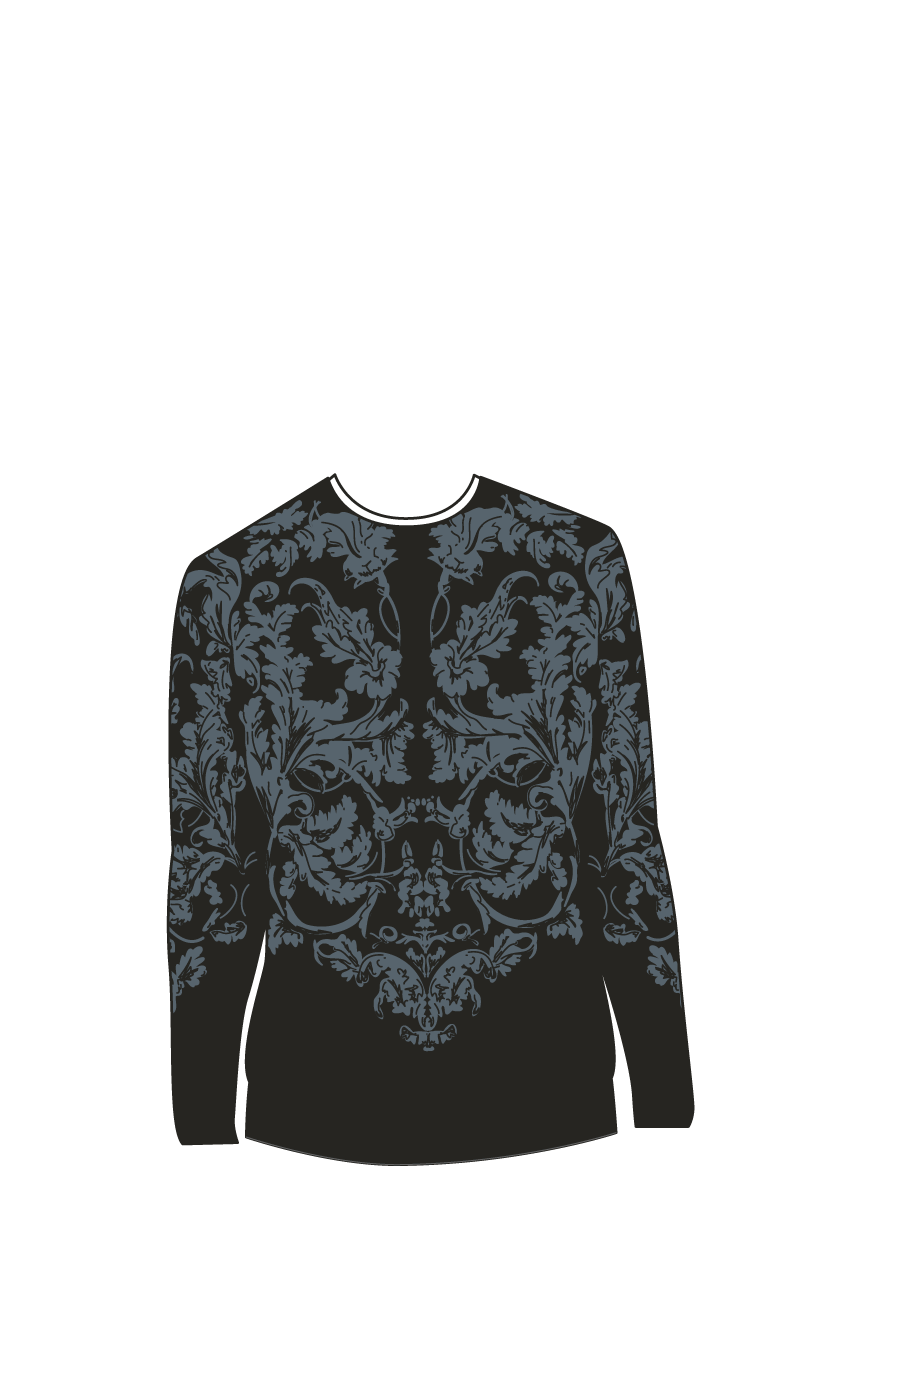 black sweater with grey vinery design